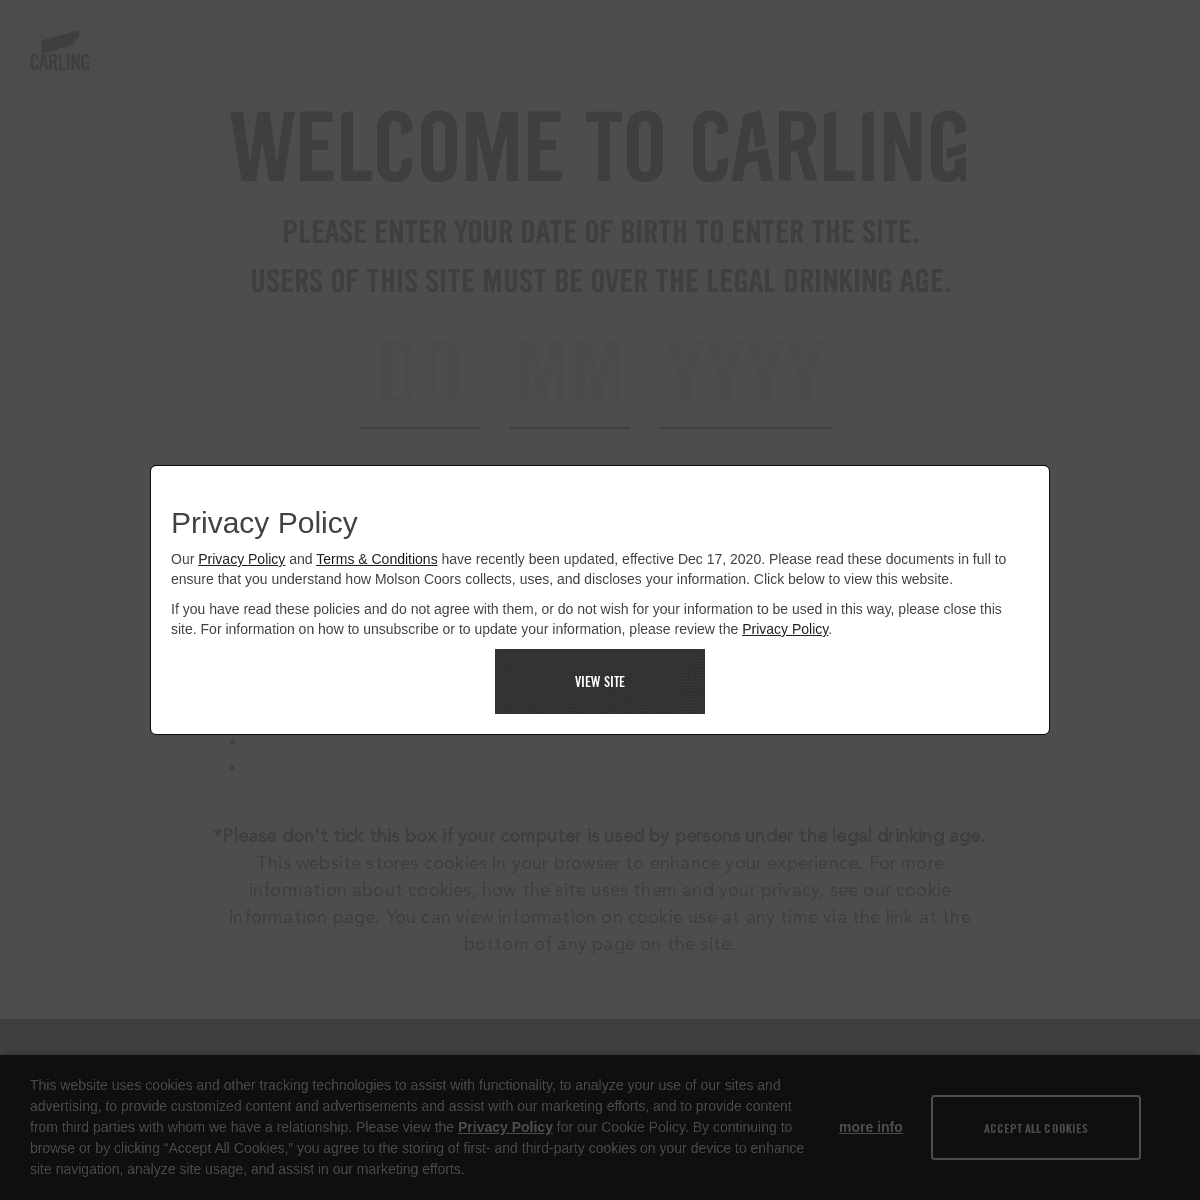 A complete backup of https://carling.com